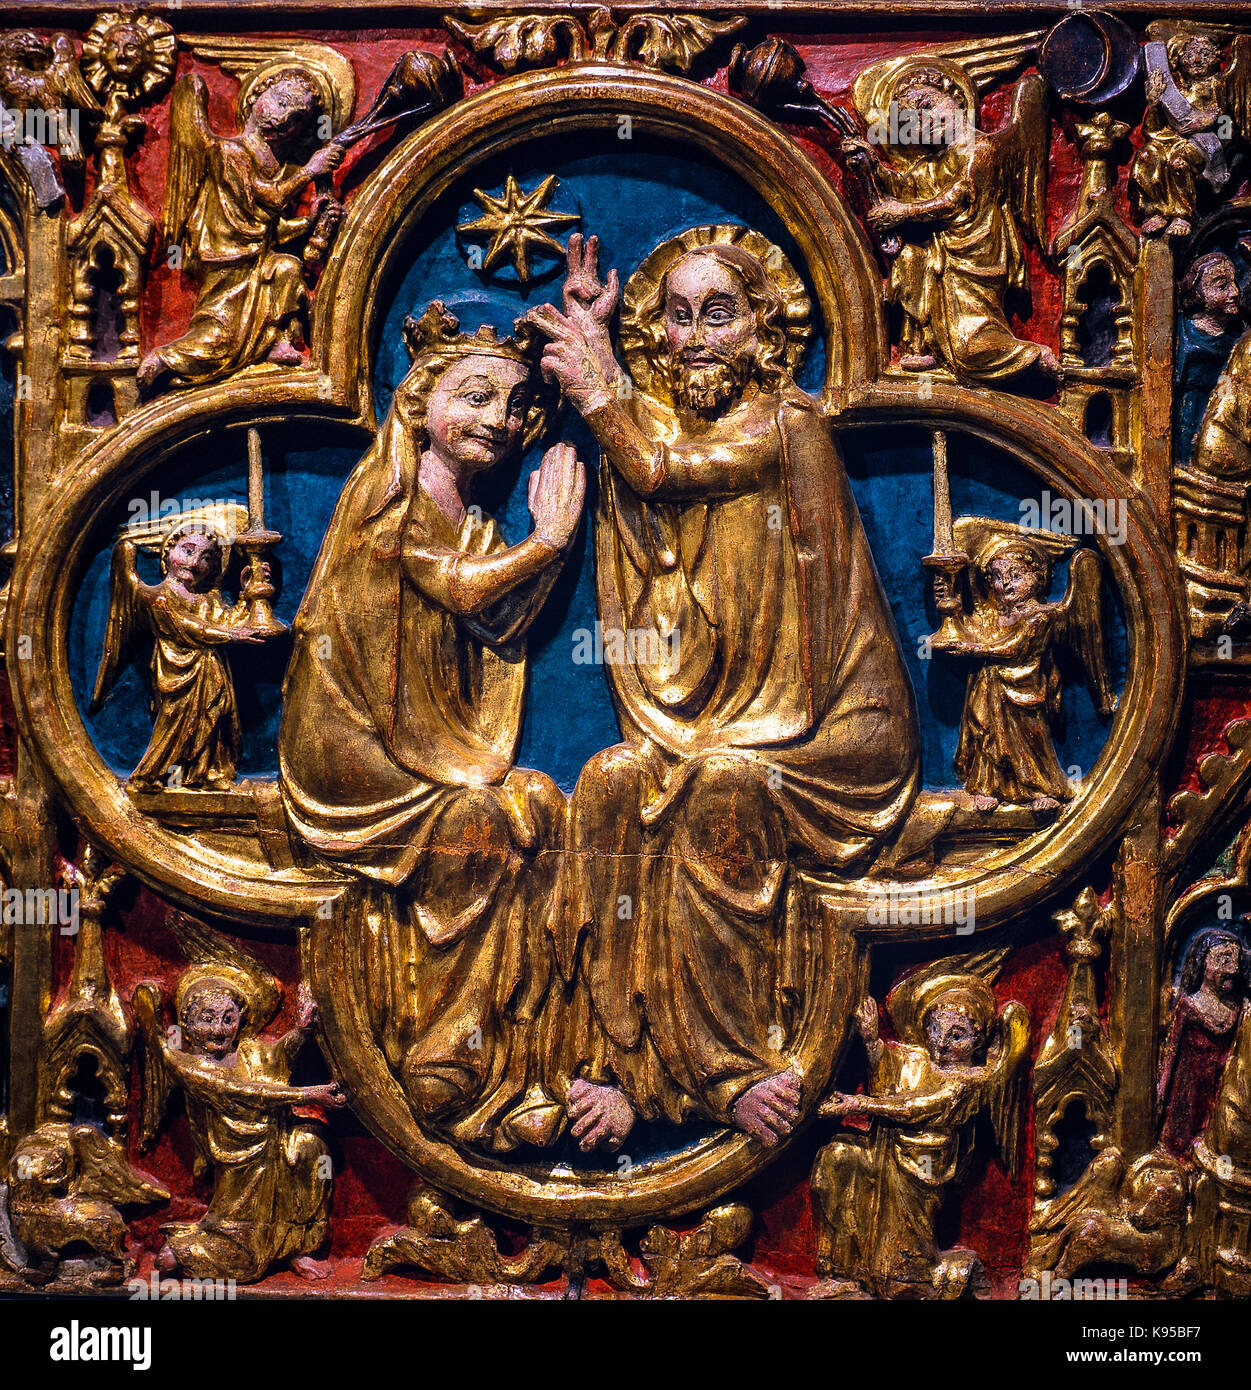 Sacre Art - Sculptor of Aosta - ancona of the altar with the coronation of the Virgin and Stories of St Pantaleon 1330 - 1334 Stock Photo